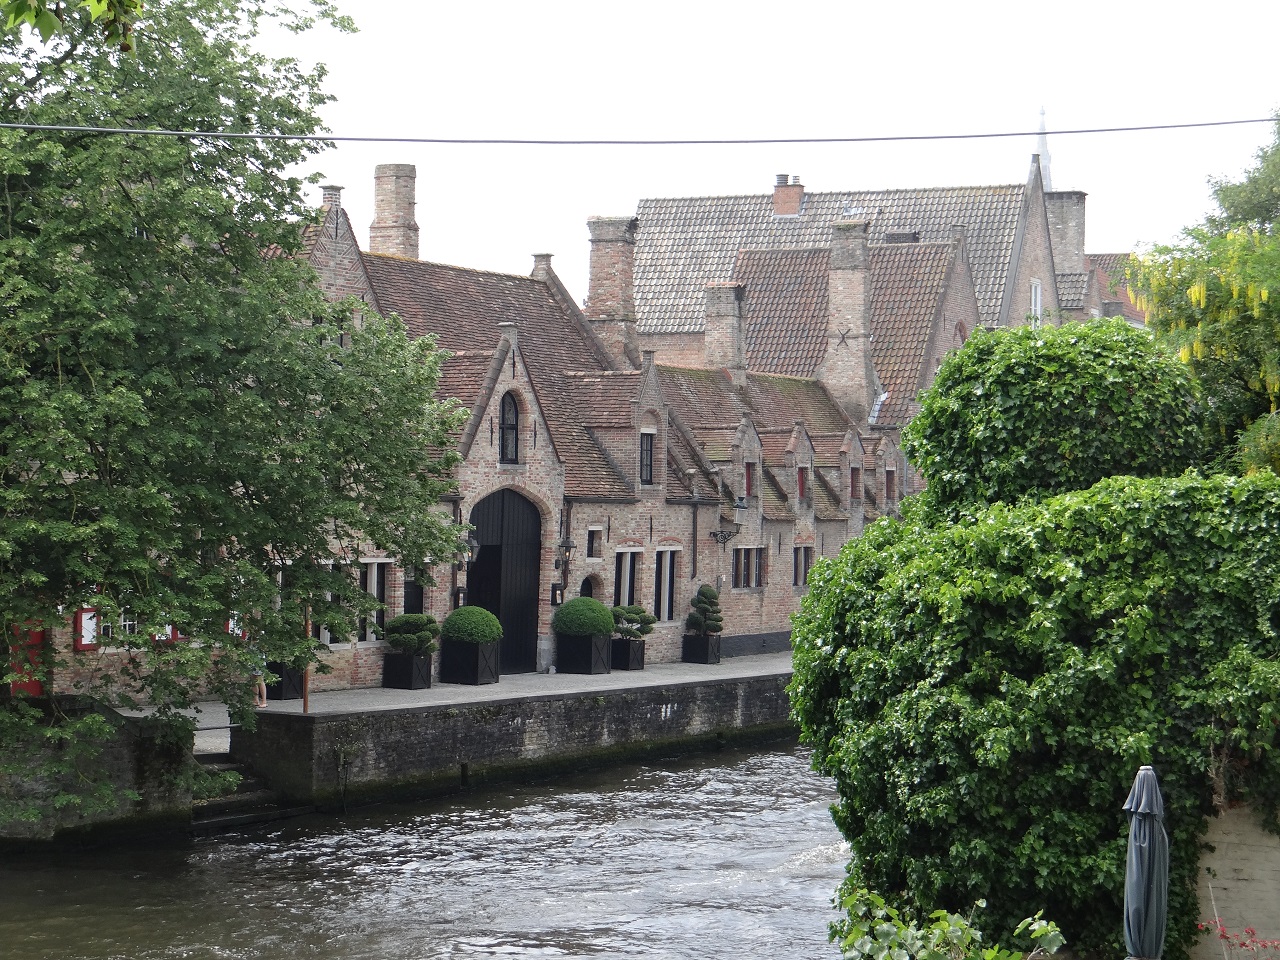 Bruges Boat Tour View of Canals